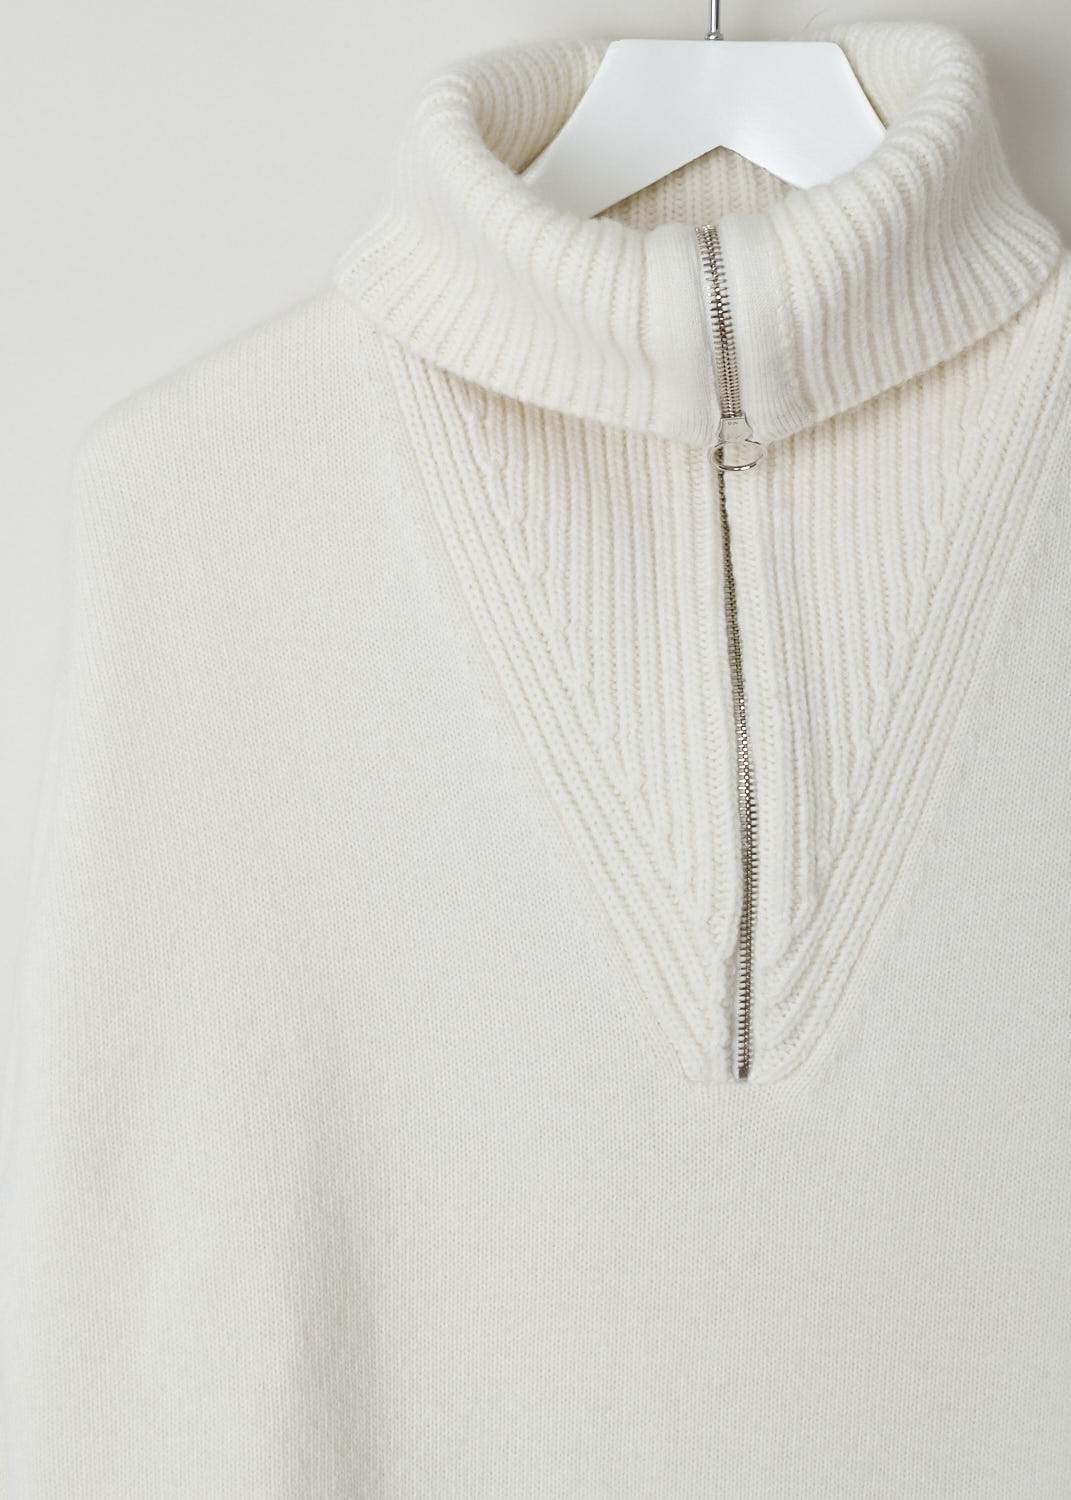 PRINGLE OF SCOTLAND, CREAM COLORED QUARTER ZIP SWEATER, WTK059_7215_CREAM, White, Detail, Cream colored turtleneck sweater. The neck has a silver-toned quarter zip and a ribbed finish. That same ribbed finish can be found on the cuffs and the hemline. Small side slits can be found on both the cuffs and the hemline.
